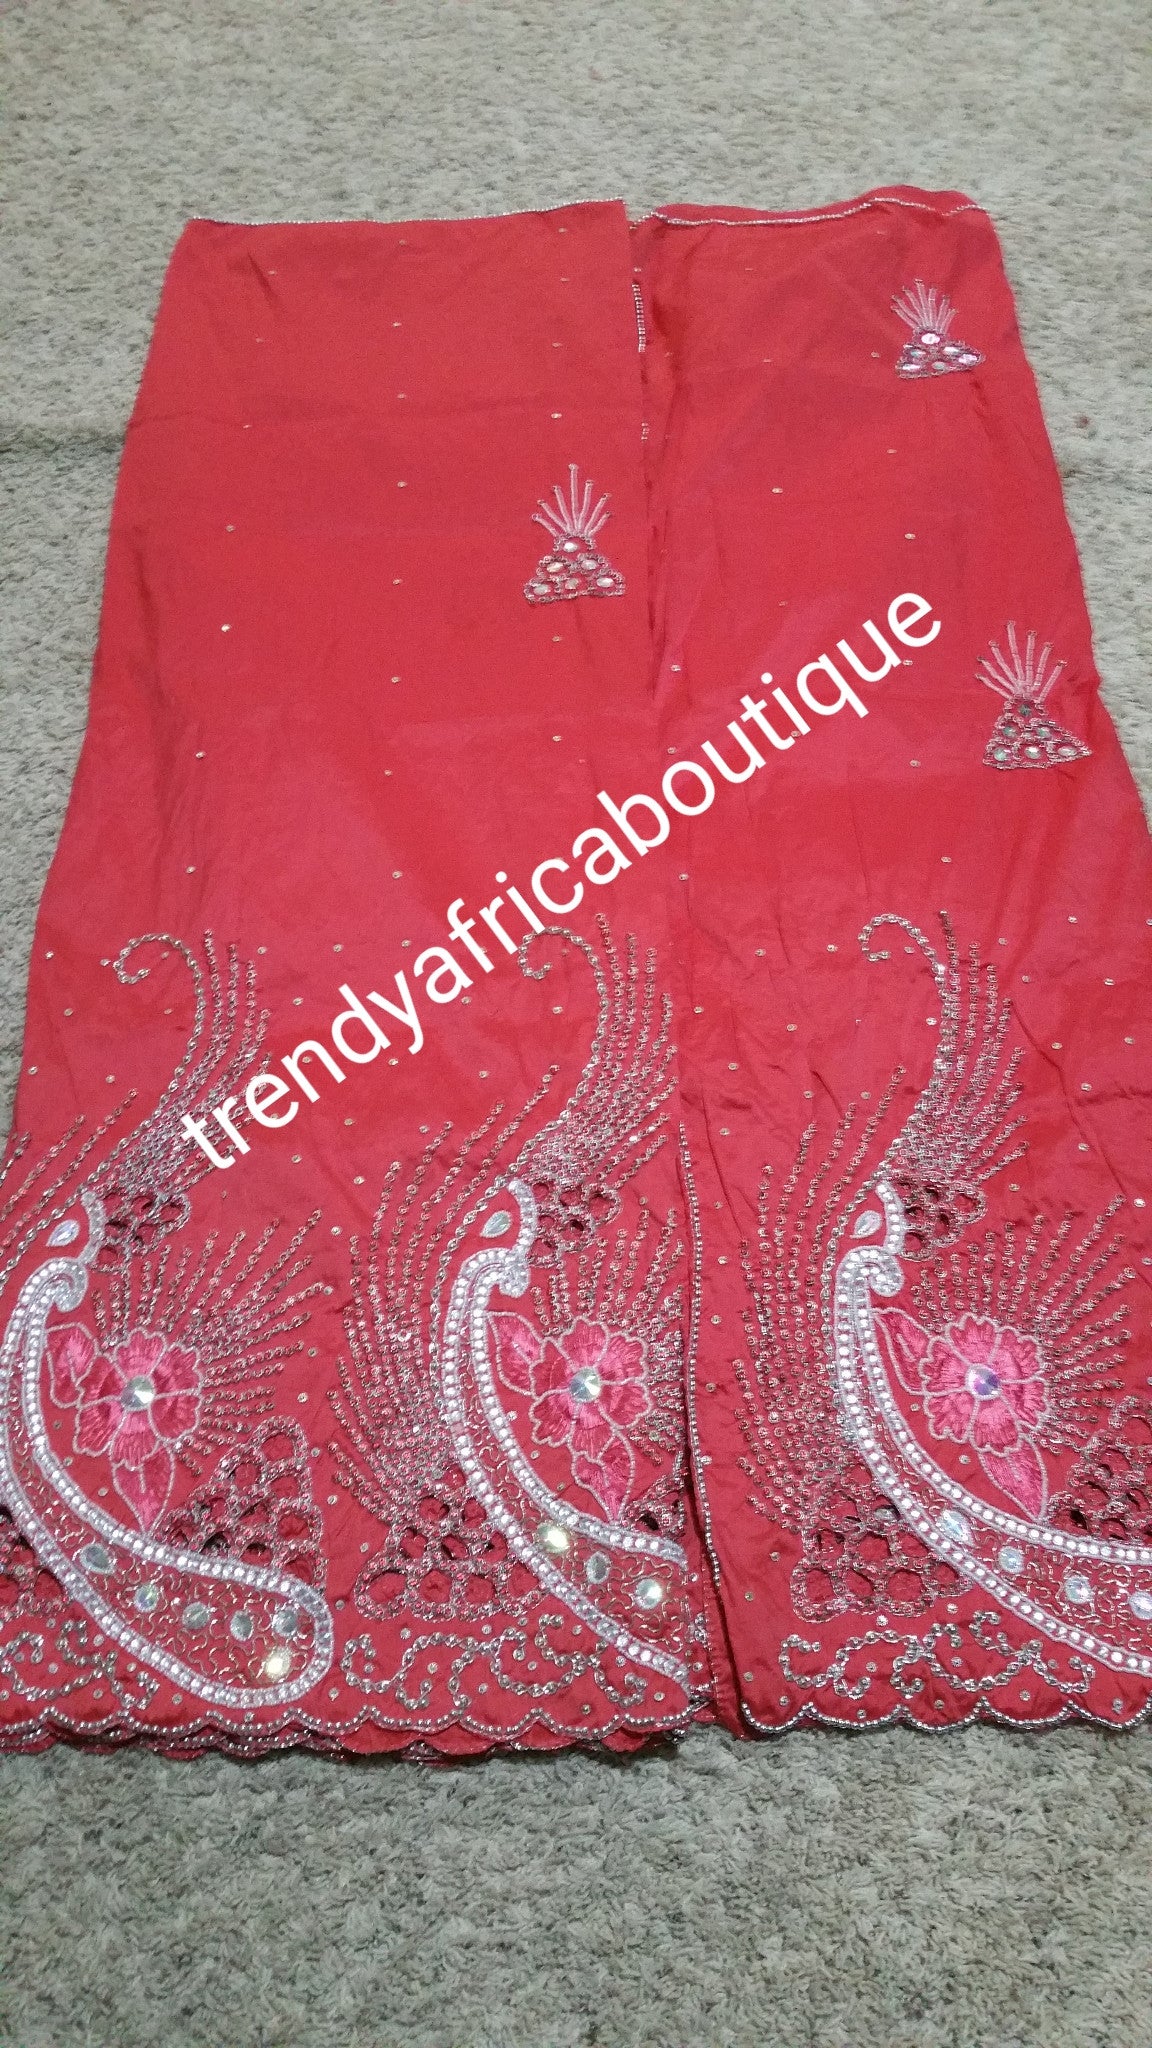 Clearance Sale: sweet Coral Nigerian  Hand Stoned George Wrapper with matching blouse. Coral color. Sold as a set of 5yds + 1.8yds matching blouse